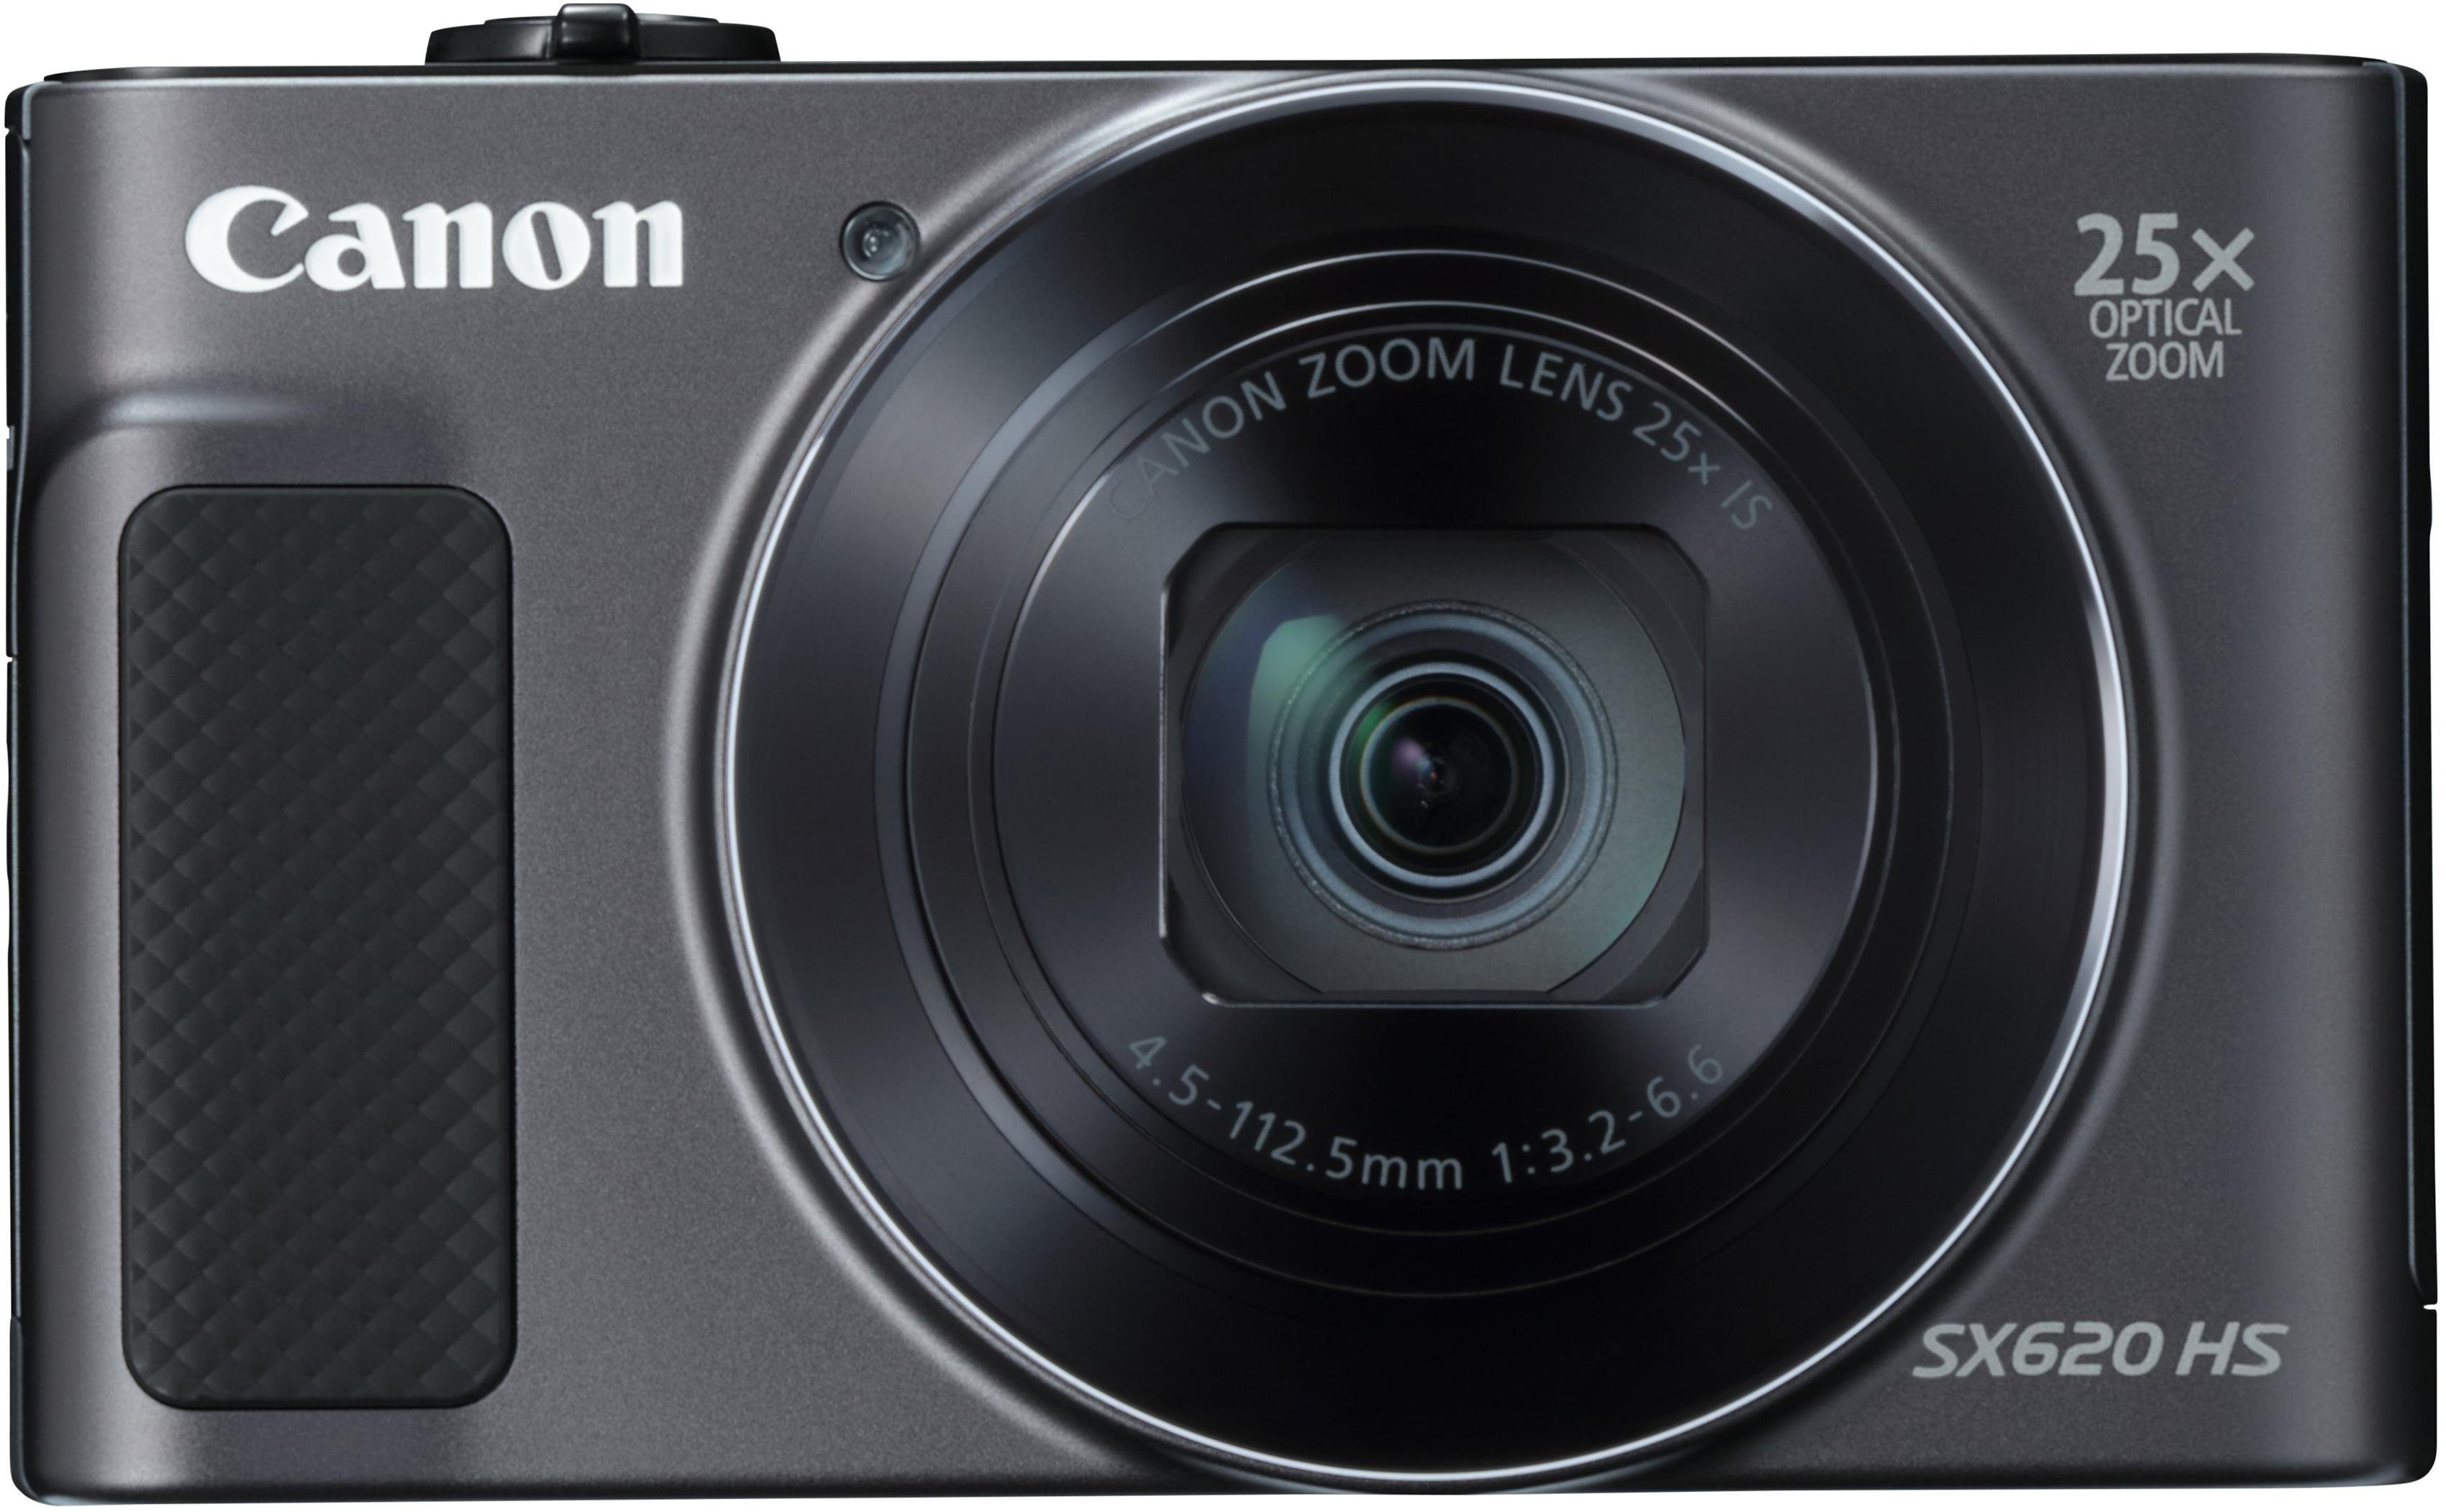 Canon CANON Power-Shot SX620 HS superzoomcamera, 20,2 megapixel, 25x opt. zoom, 7,5 cm (3 inch) display